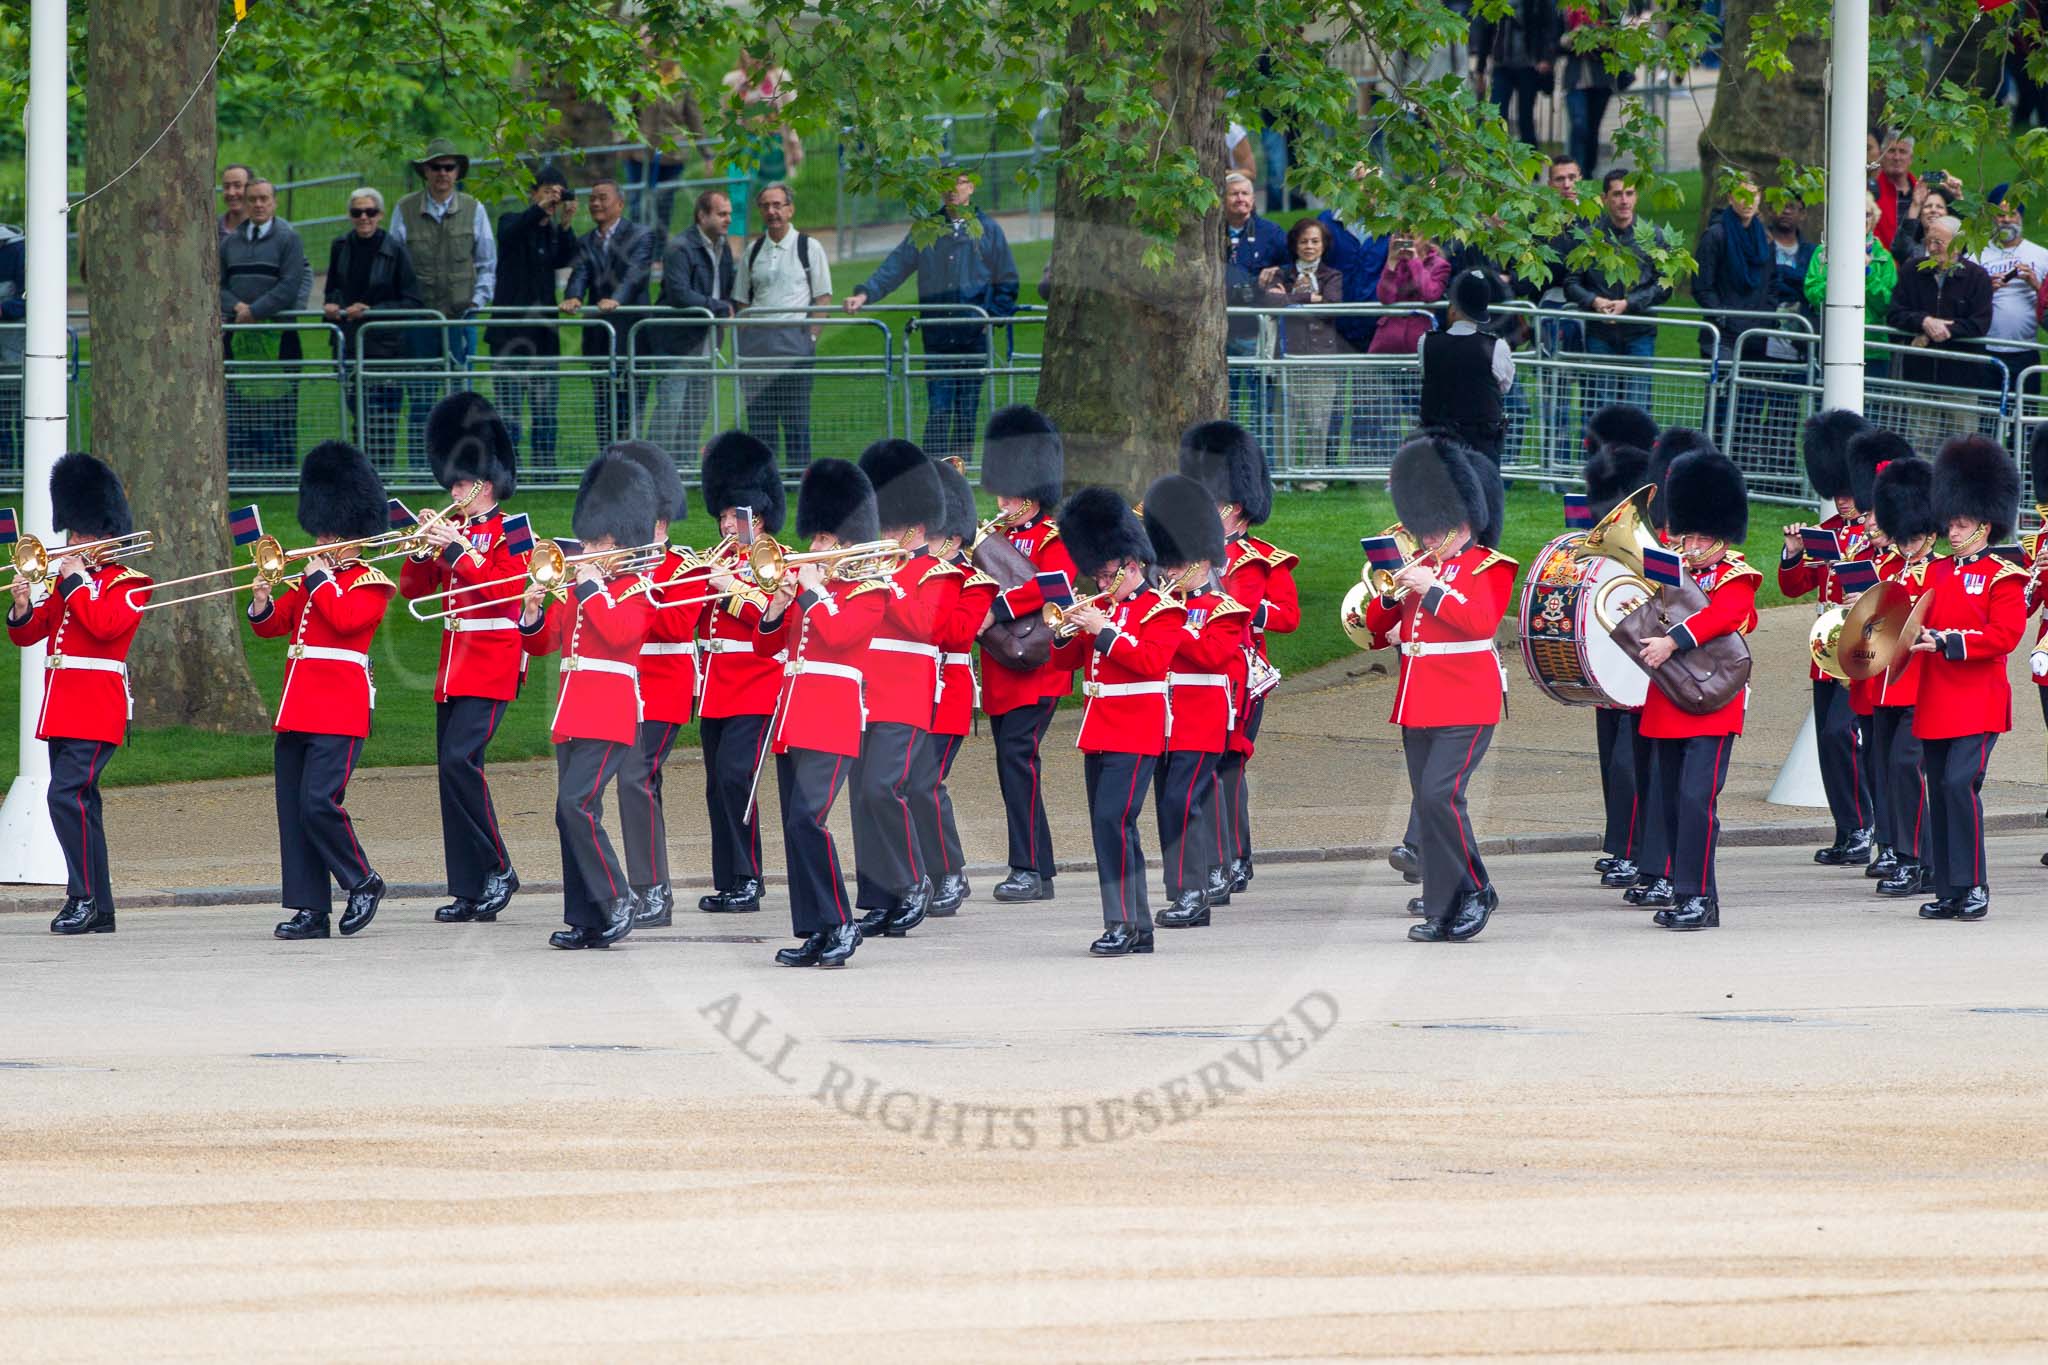 Major General's Review 2013: Musicians of the Band of the Coldstream Guards marching on Horse Guards Road..
Horse Guards Parade, Westminster,
London SW1,

United Kingdom,
on 01 June 2013 at 10:12, image #37